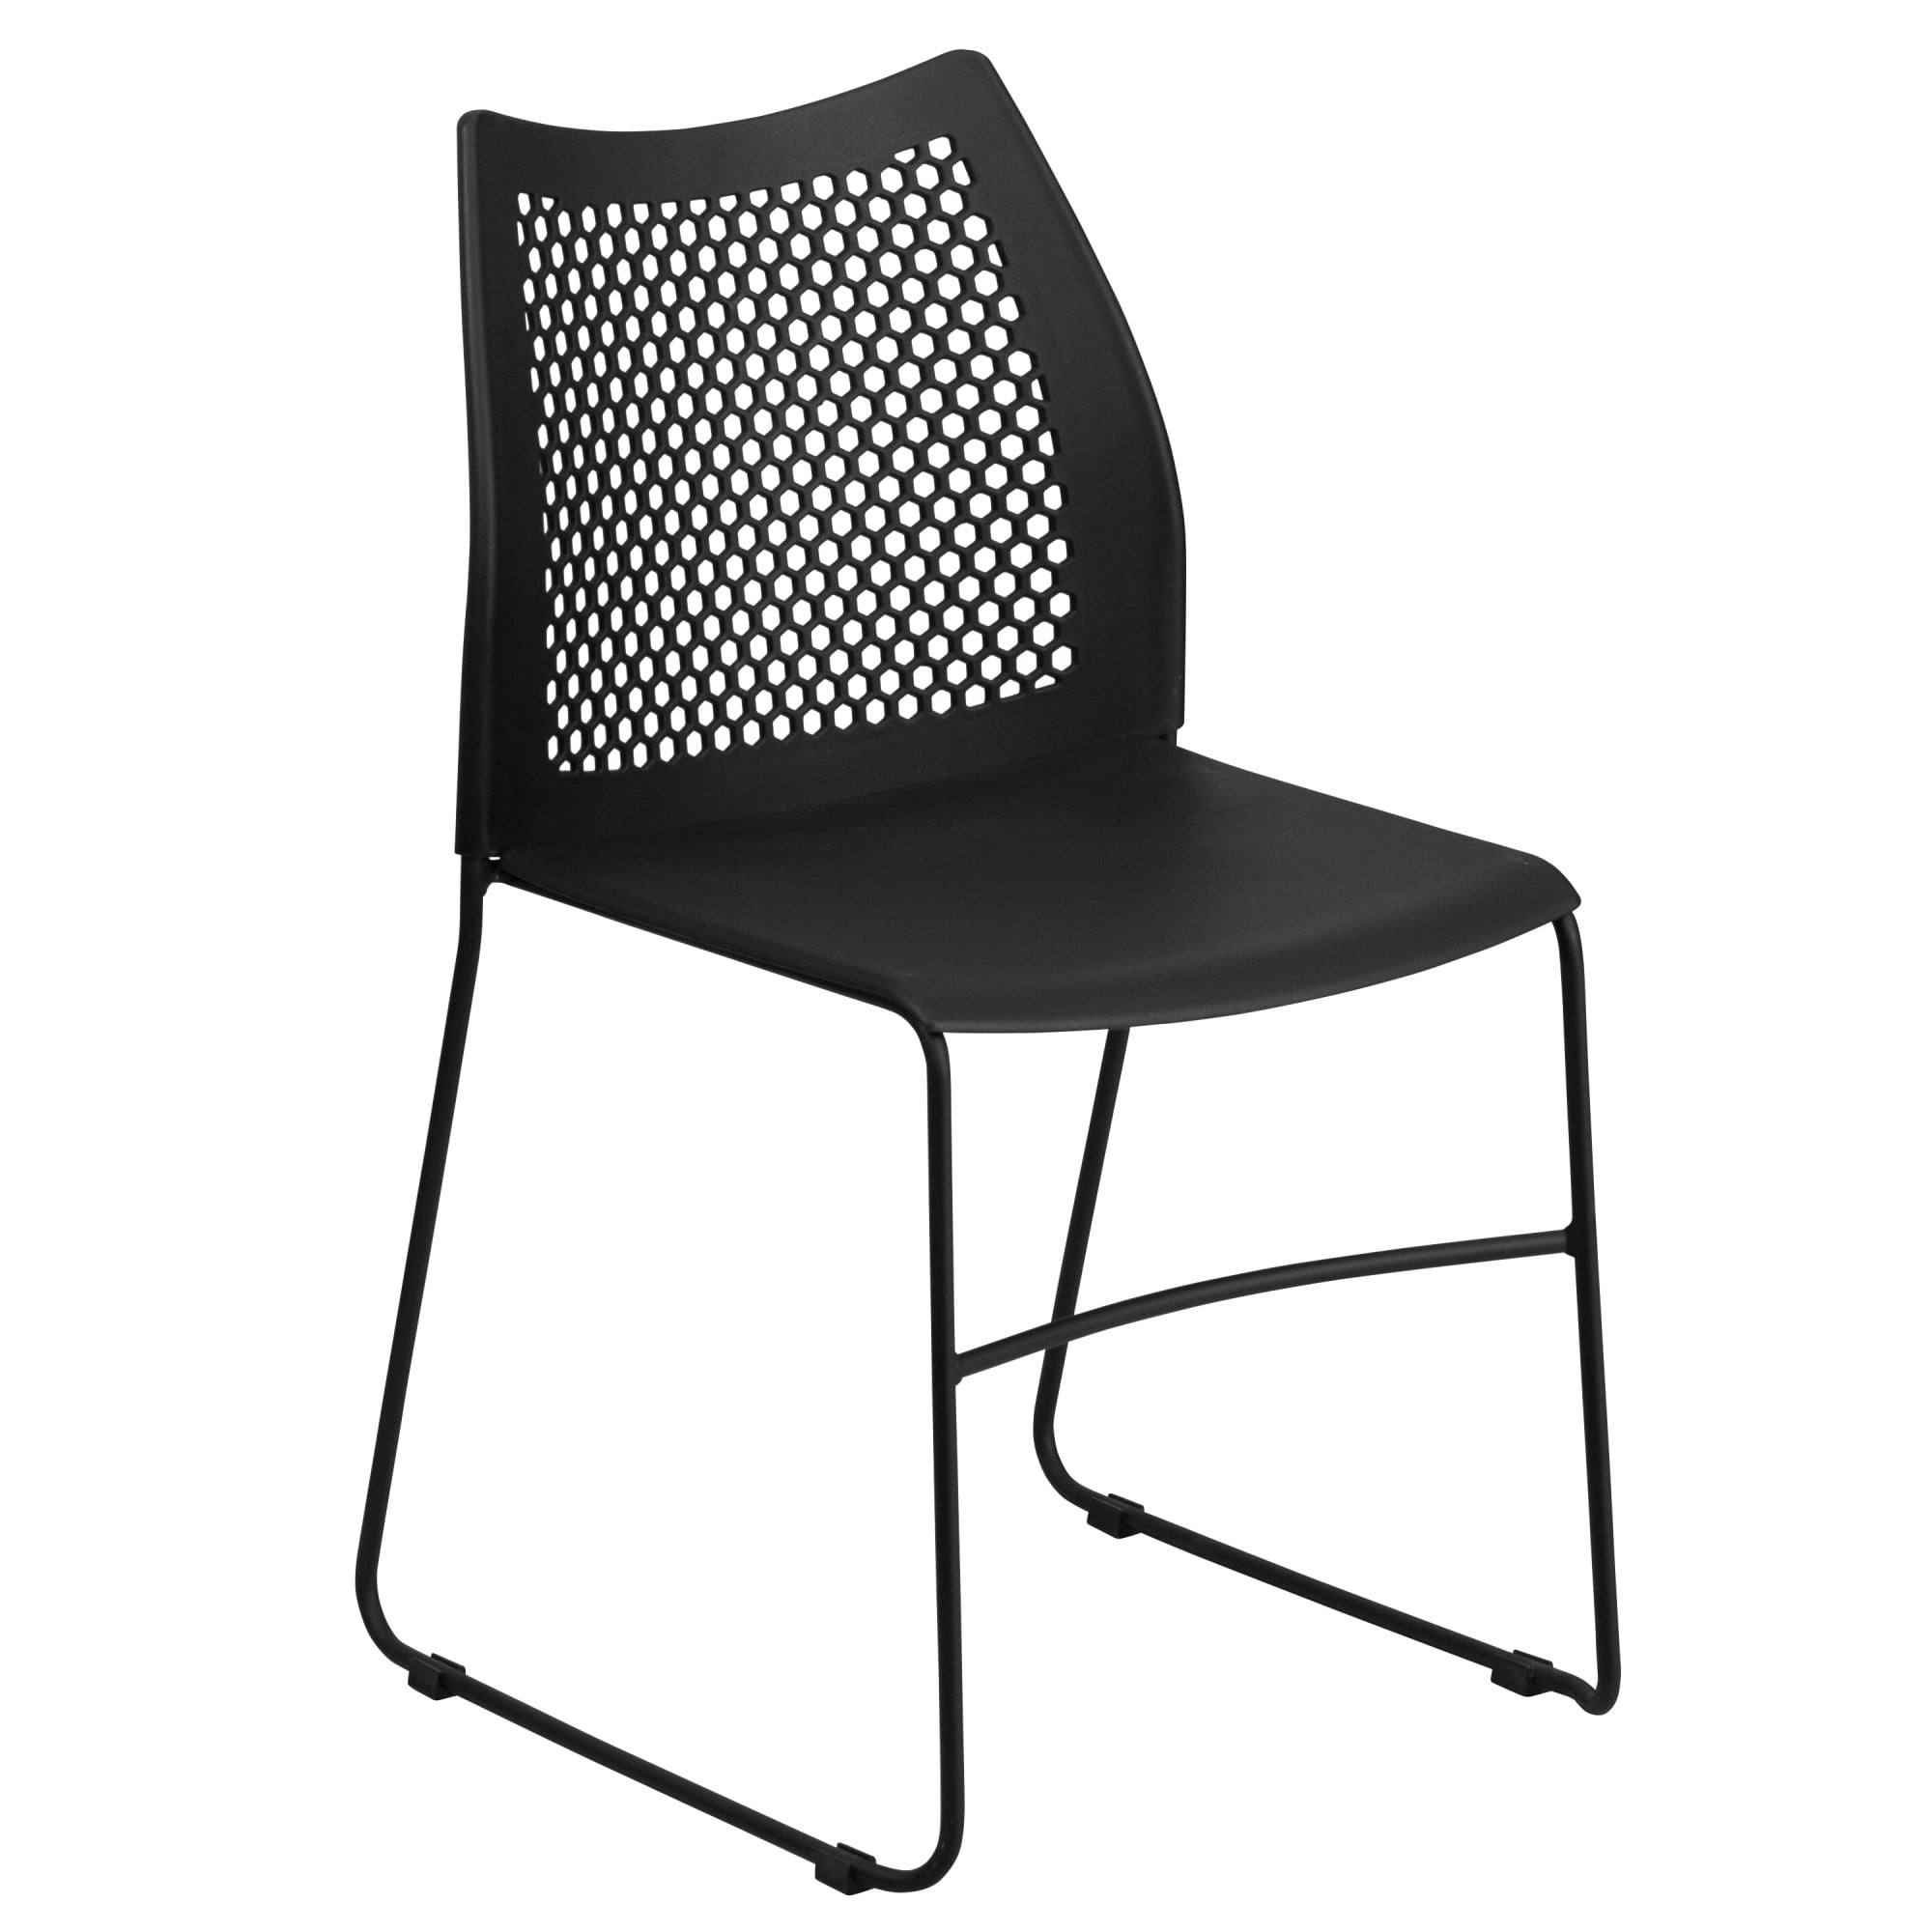 Details about   HERCULES Series 880 lb Capacity Black Full Back Contoured Stack Chair with Sled 